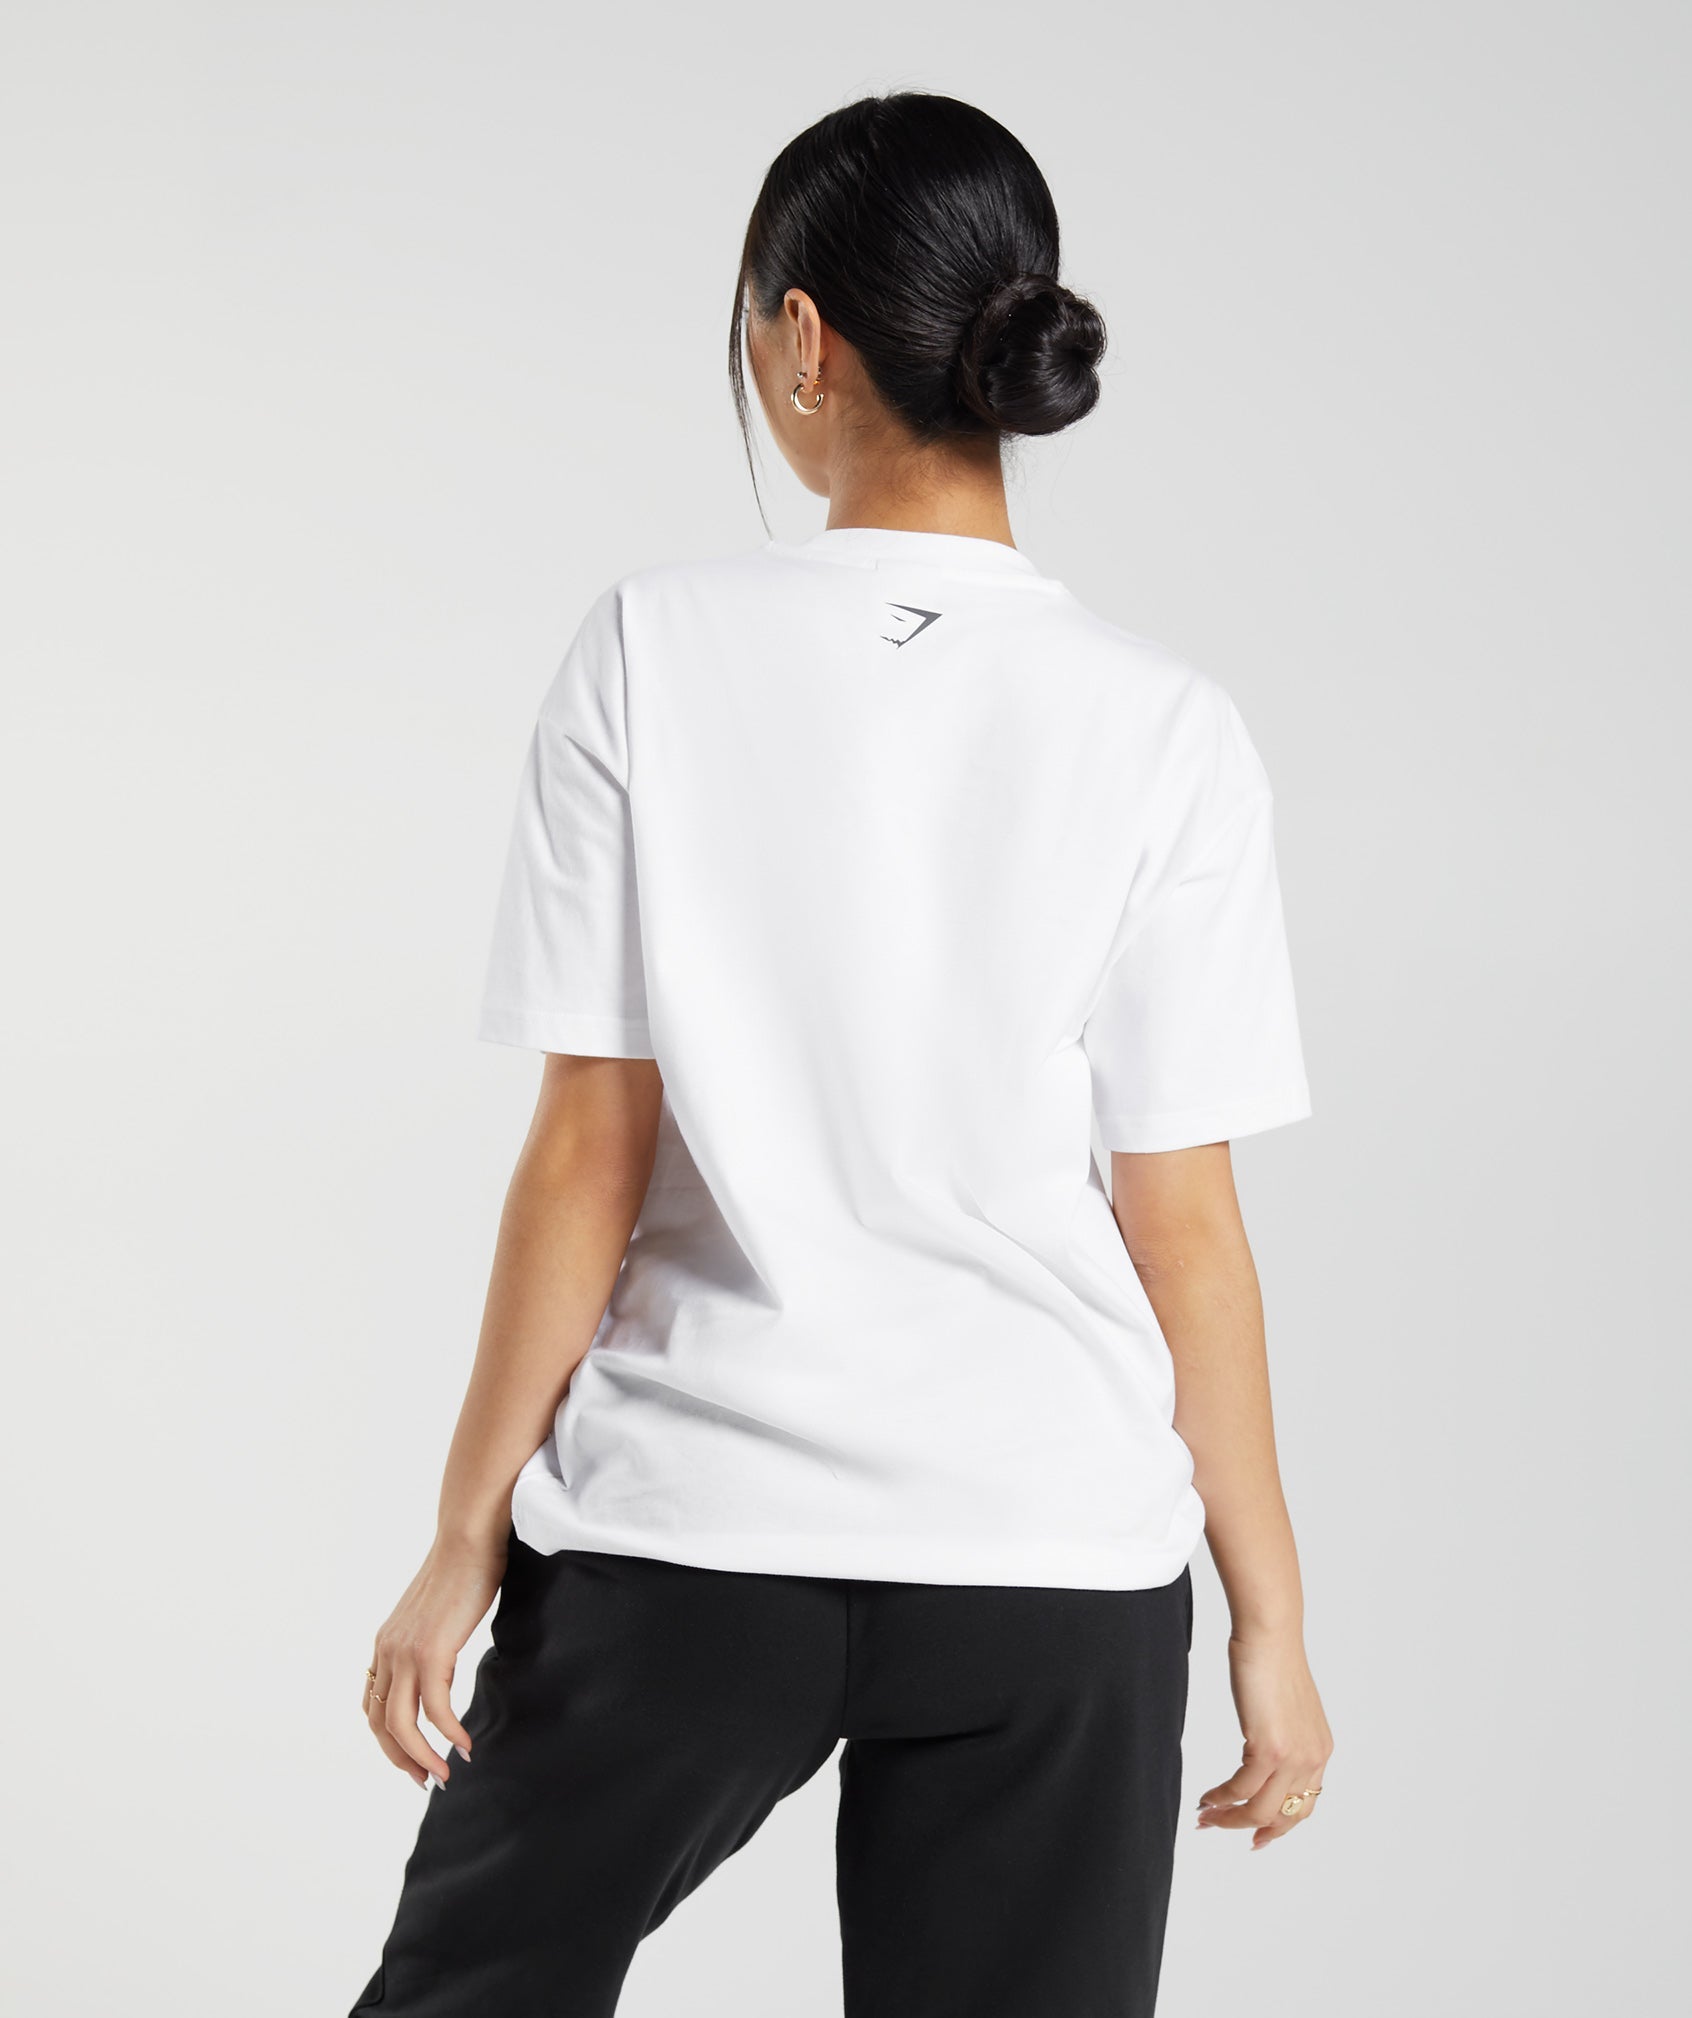 Gymshark Maxed Out Oversized T-Shirt - White